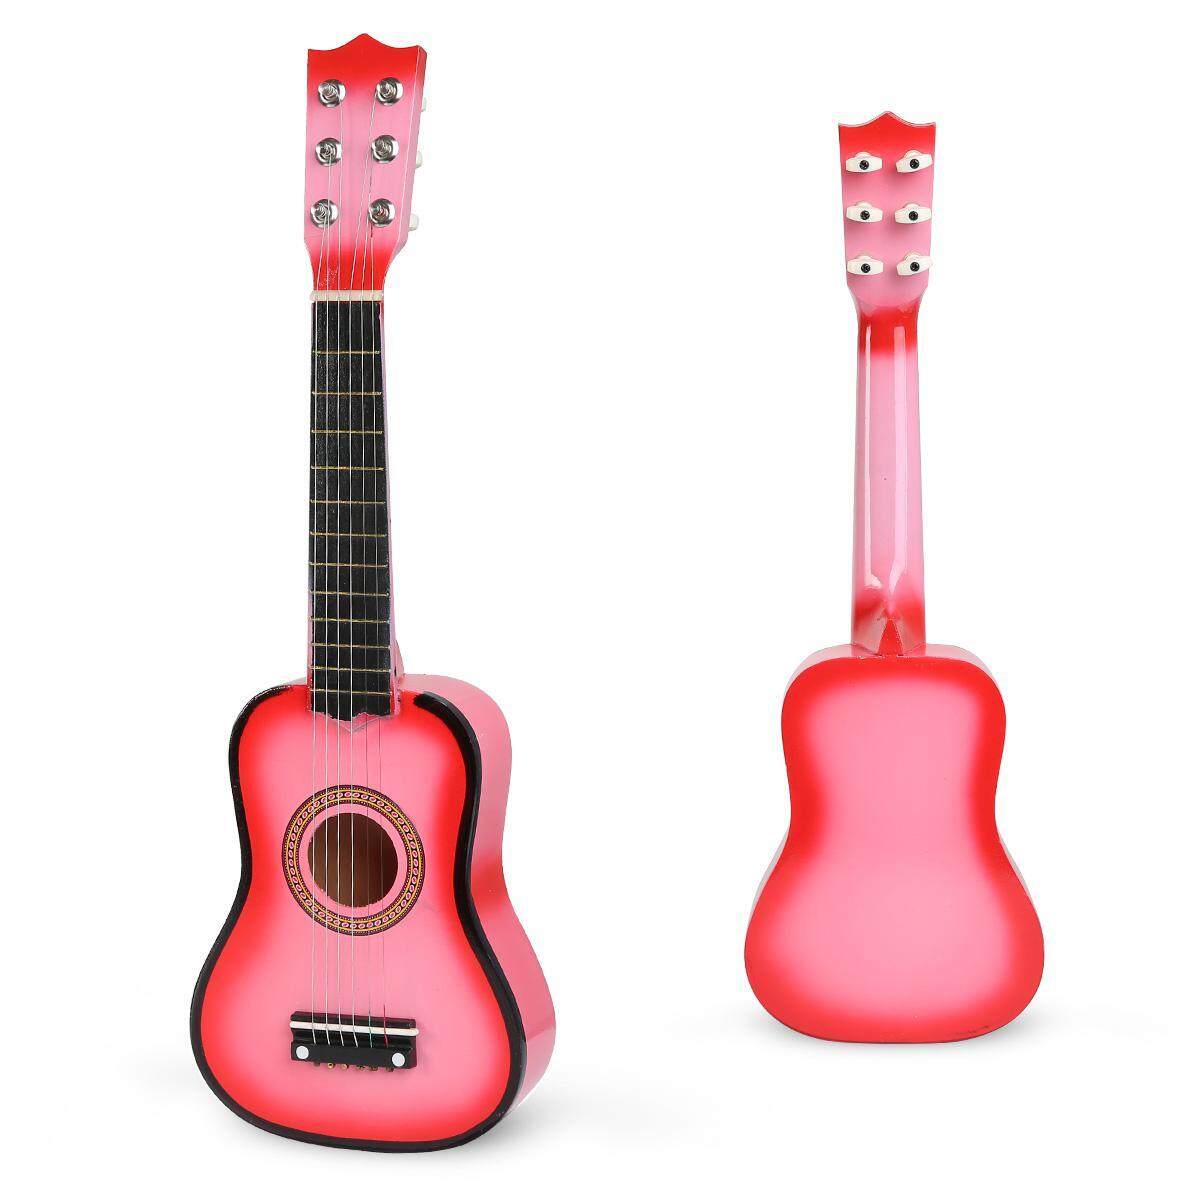 FutureShapers 4 Strings Musical Wooden Toy Ukulele Small Guitar For Kids early education